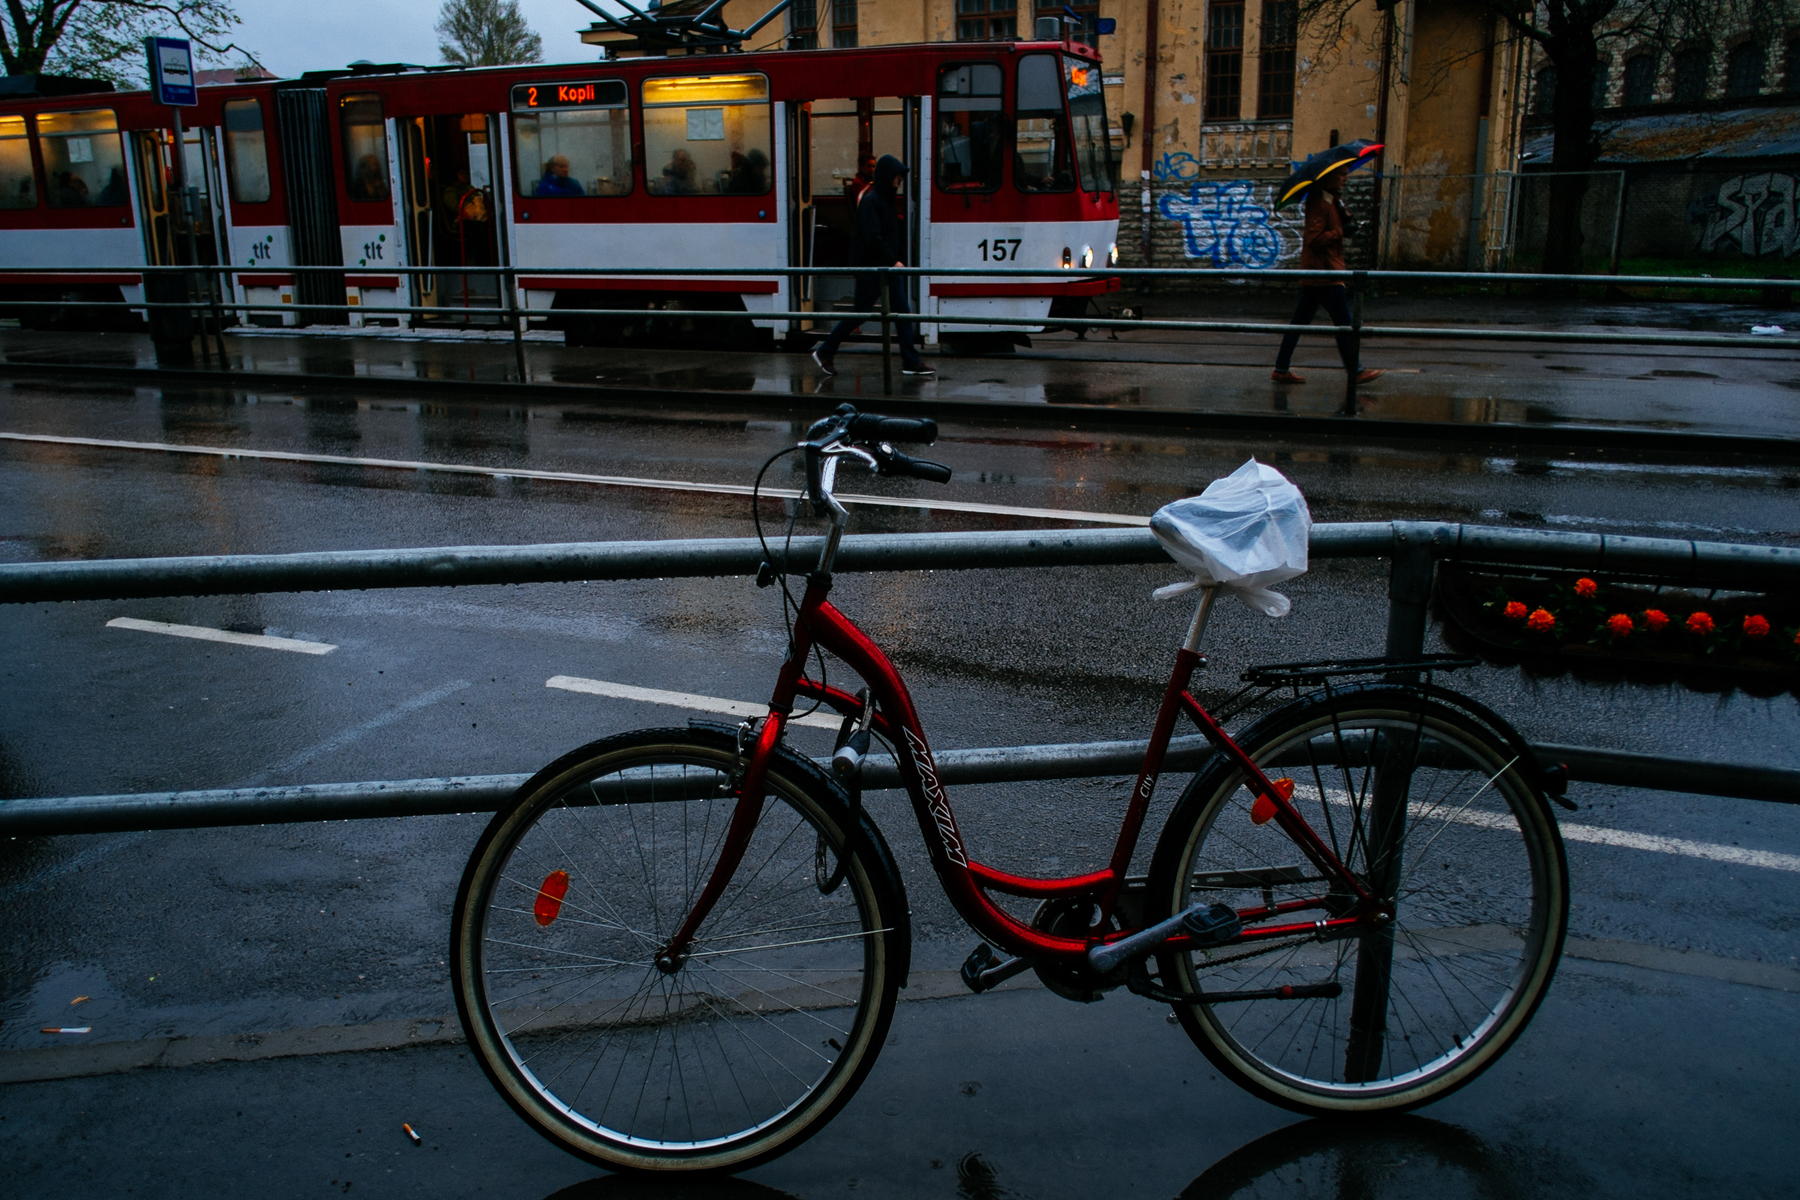 A red bicycle on a rainy day.